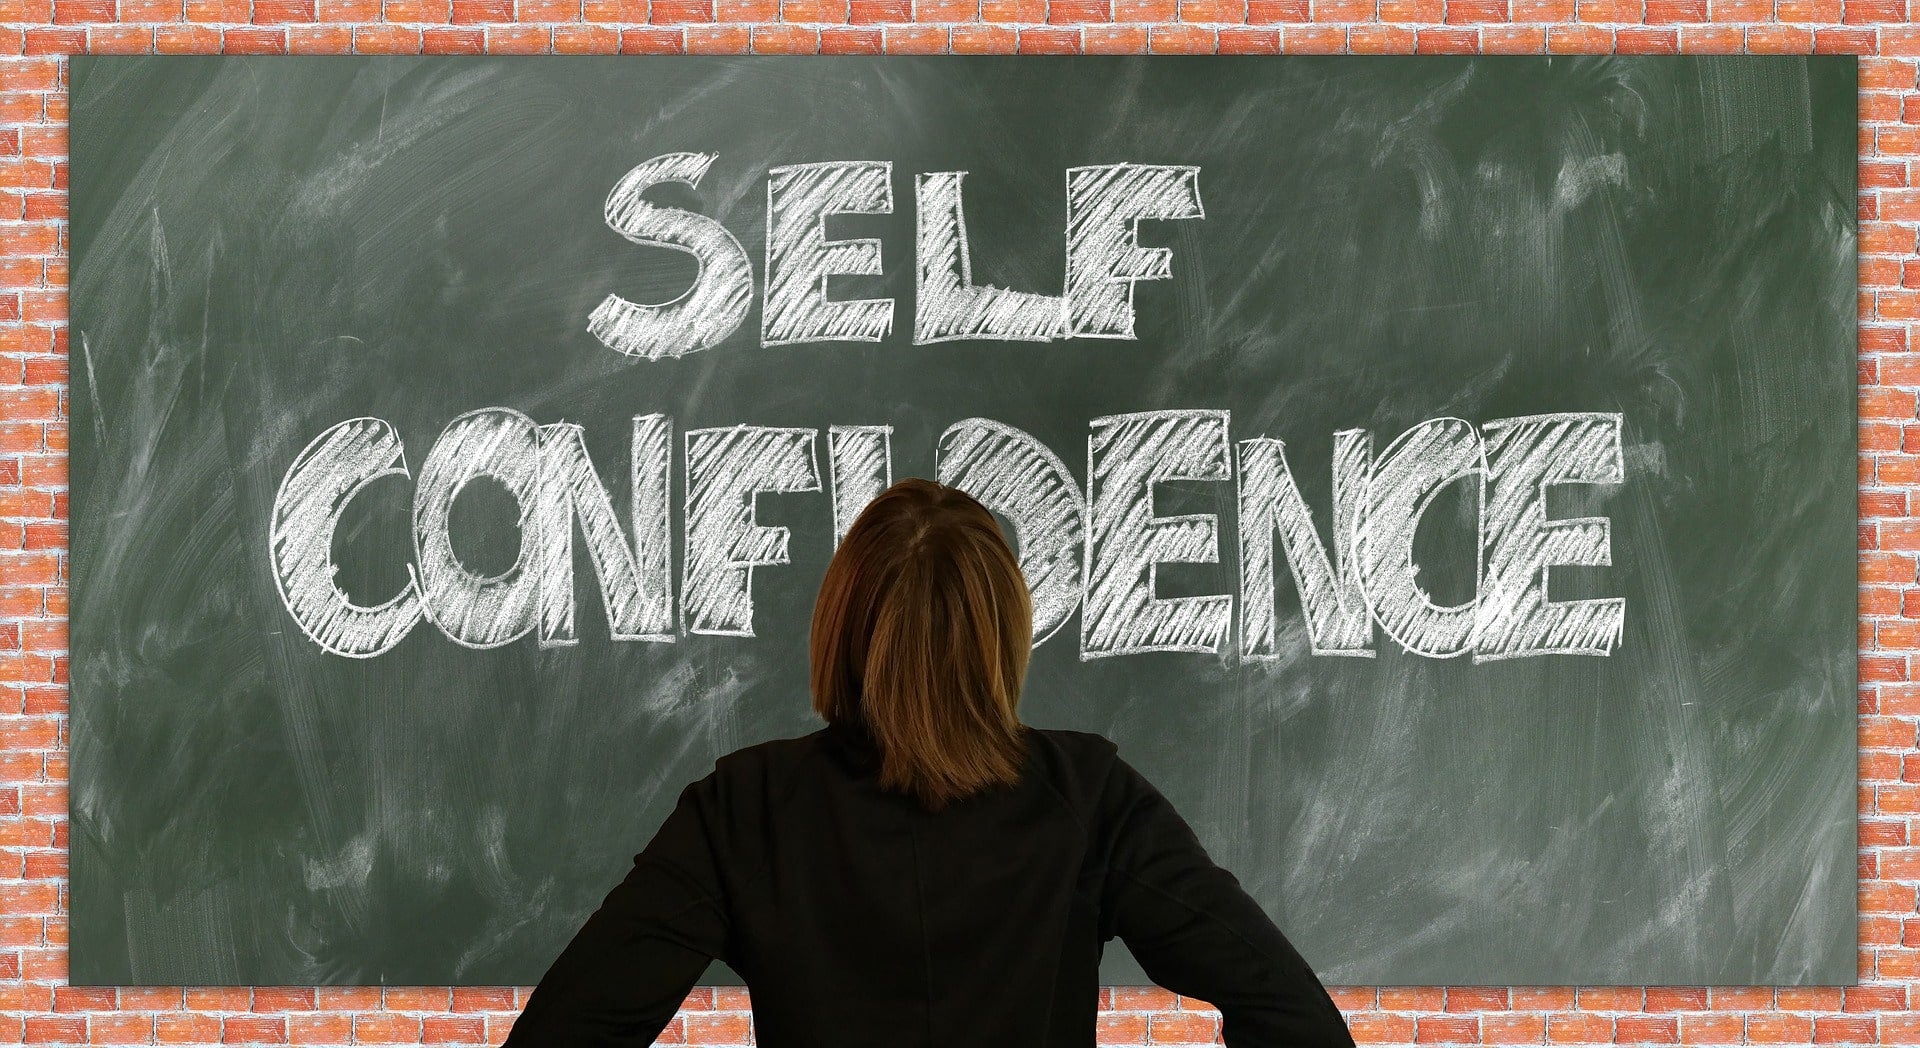 Sassiness and Confidence comes from Within - How to Improve Self-Confidence as a Teenager